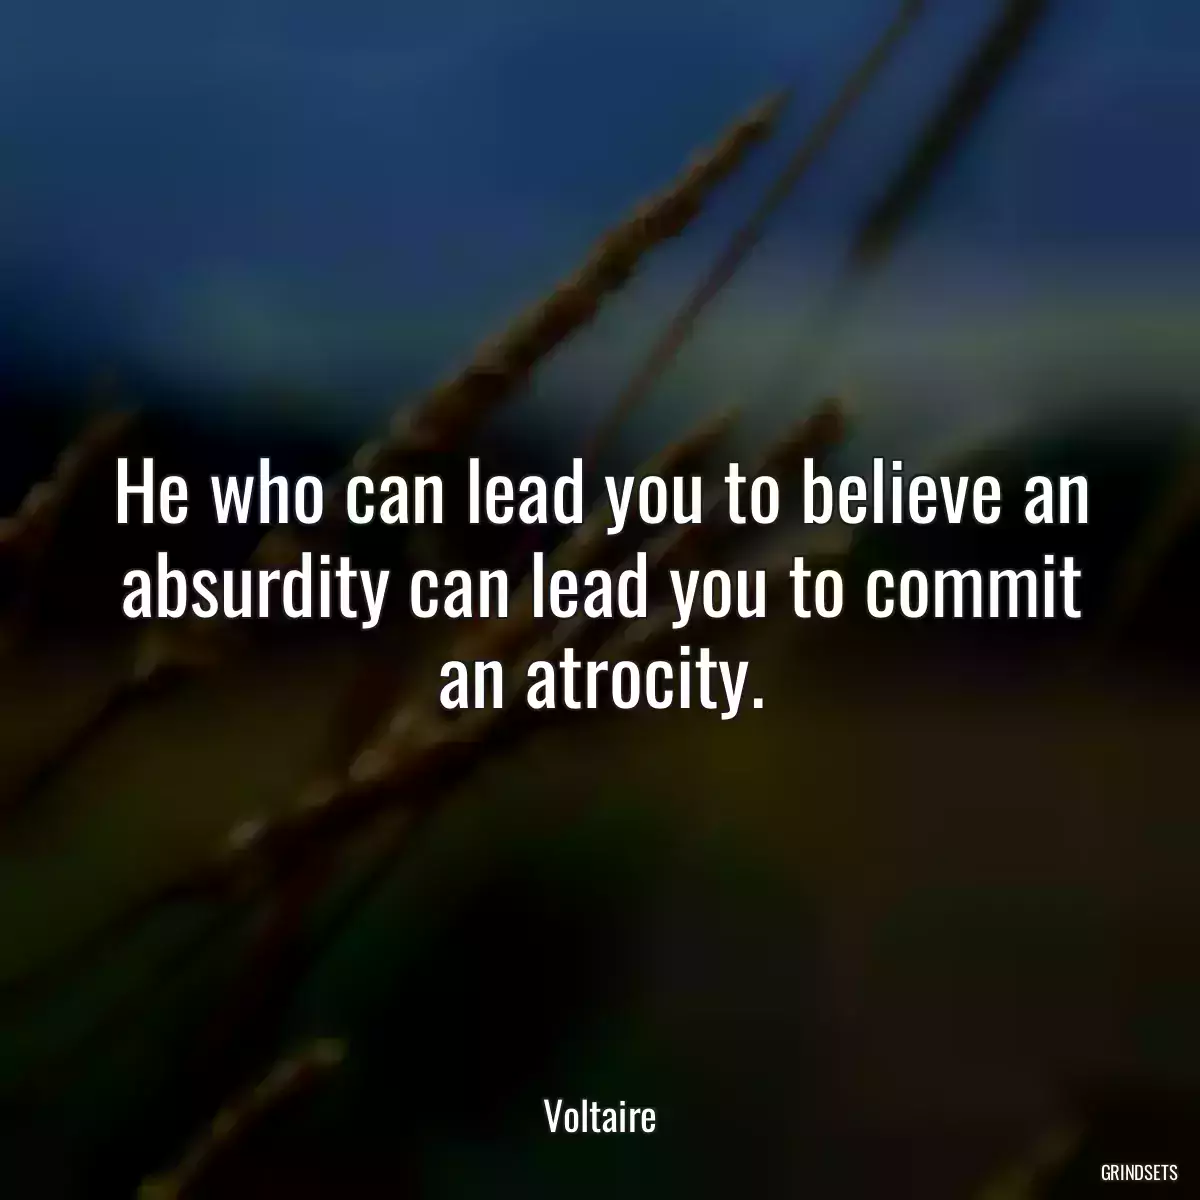 He who can lead you to believe an absurdity can lead you to commit an atrocity.